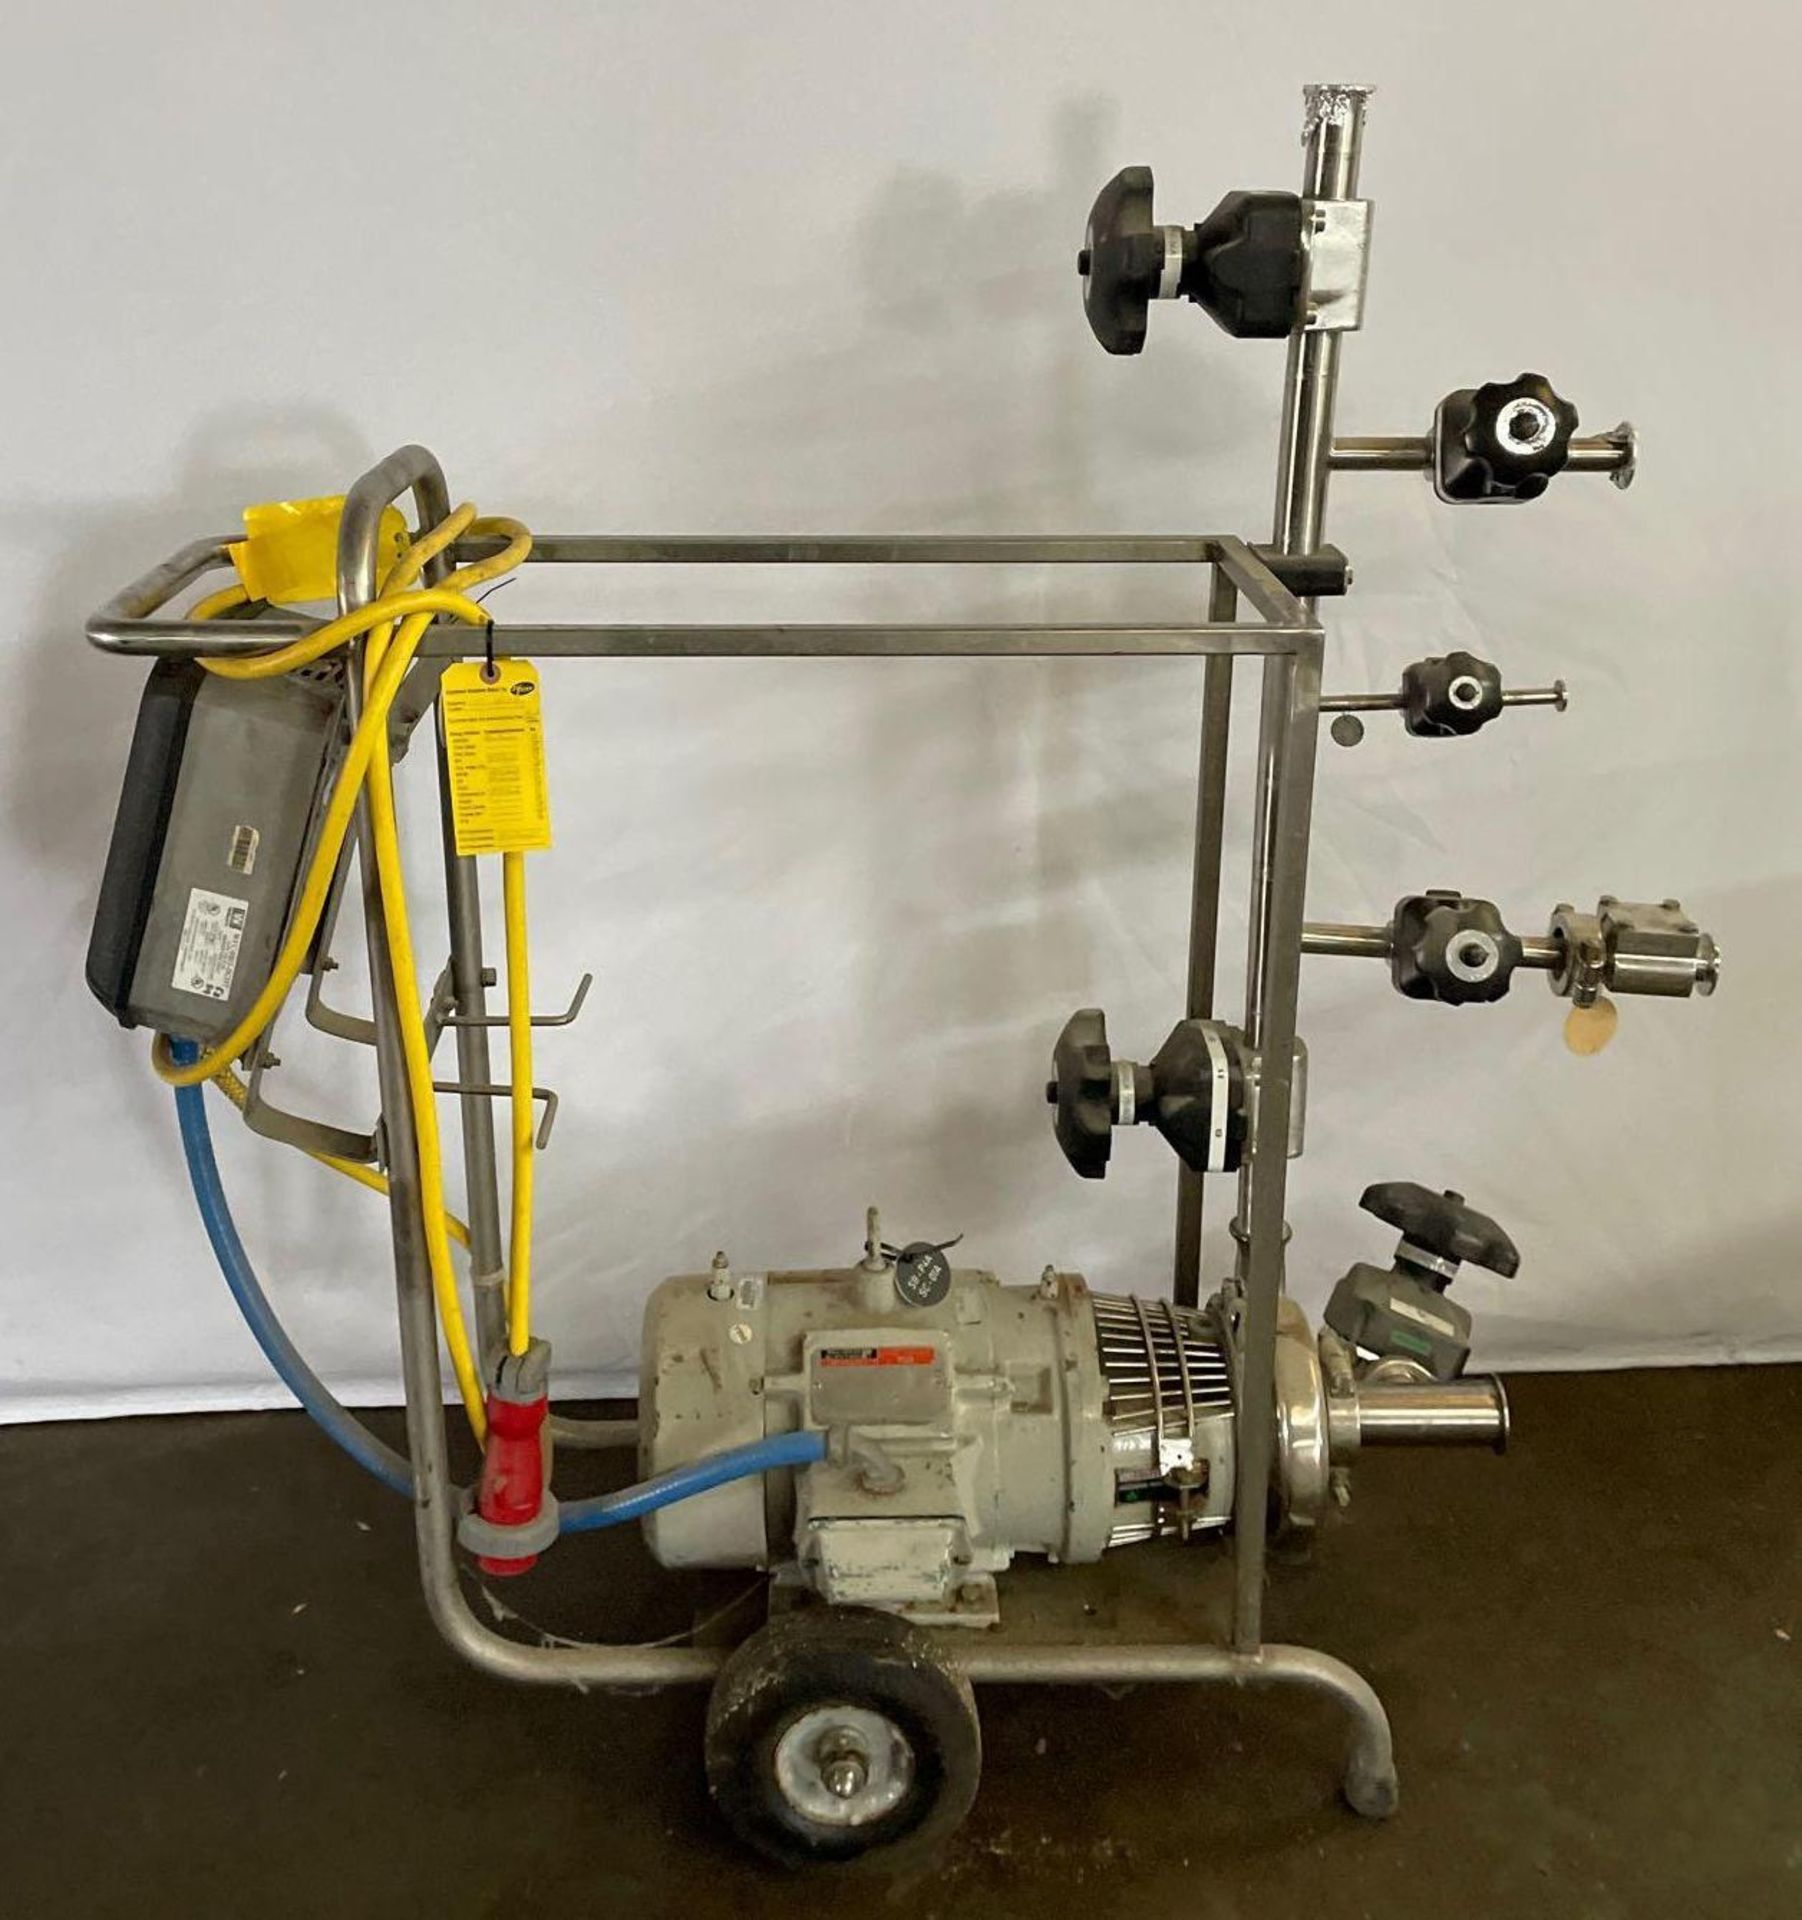 Reliance Electric Pump Motor on Mobil Cart